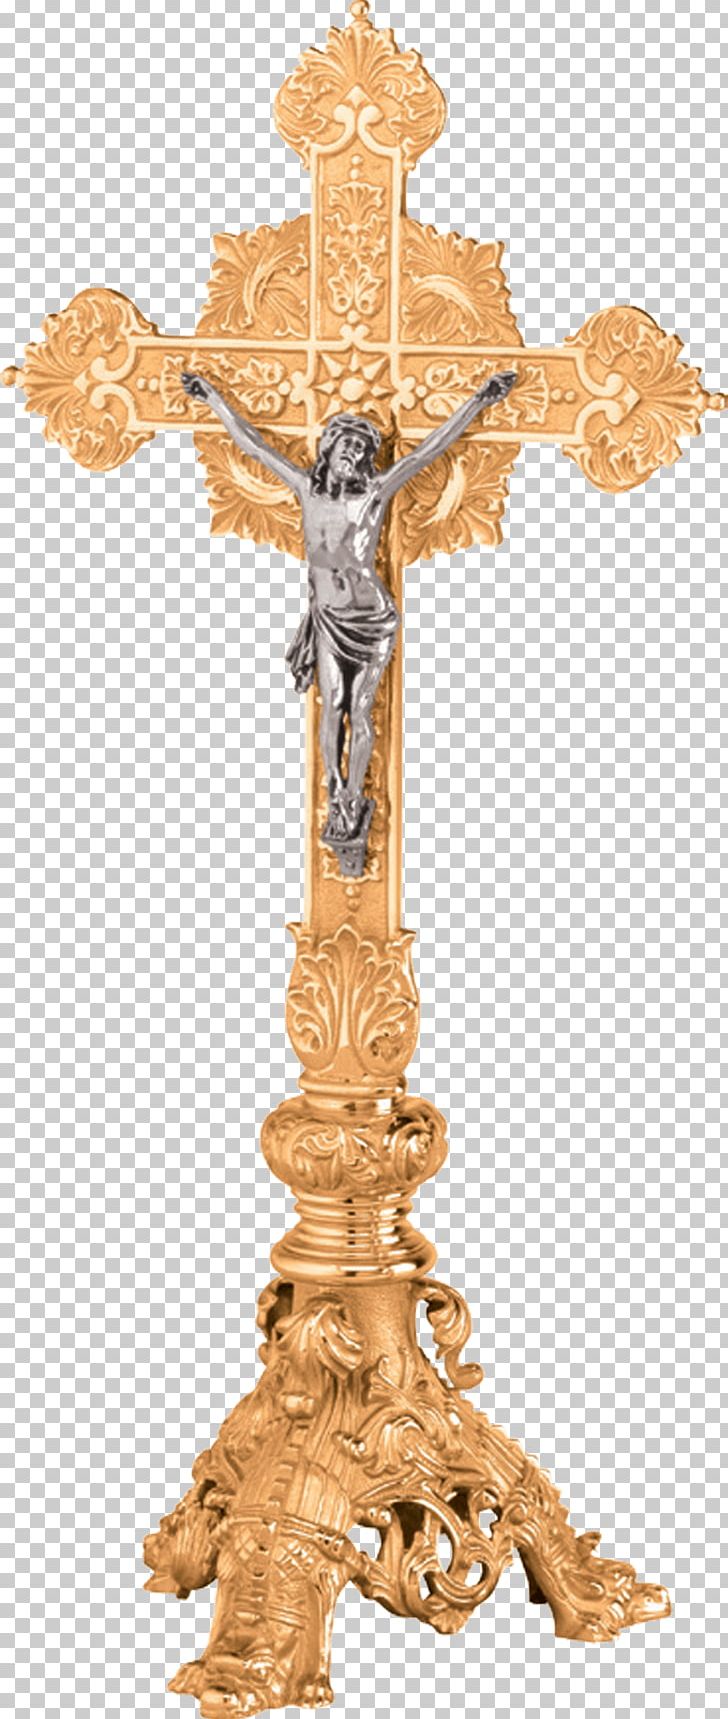 Altar Crucifix Cross Chalice PNG, Clipart, Altar, Altar Crucifix, Artifact, Chalice, Chapel Free PNG Download